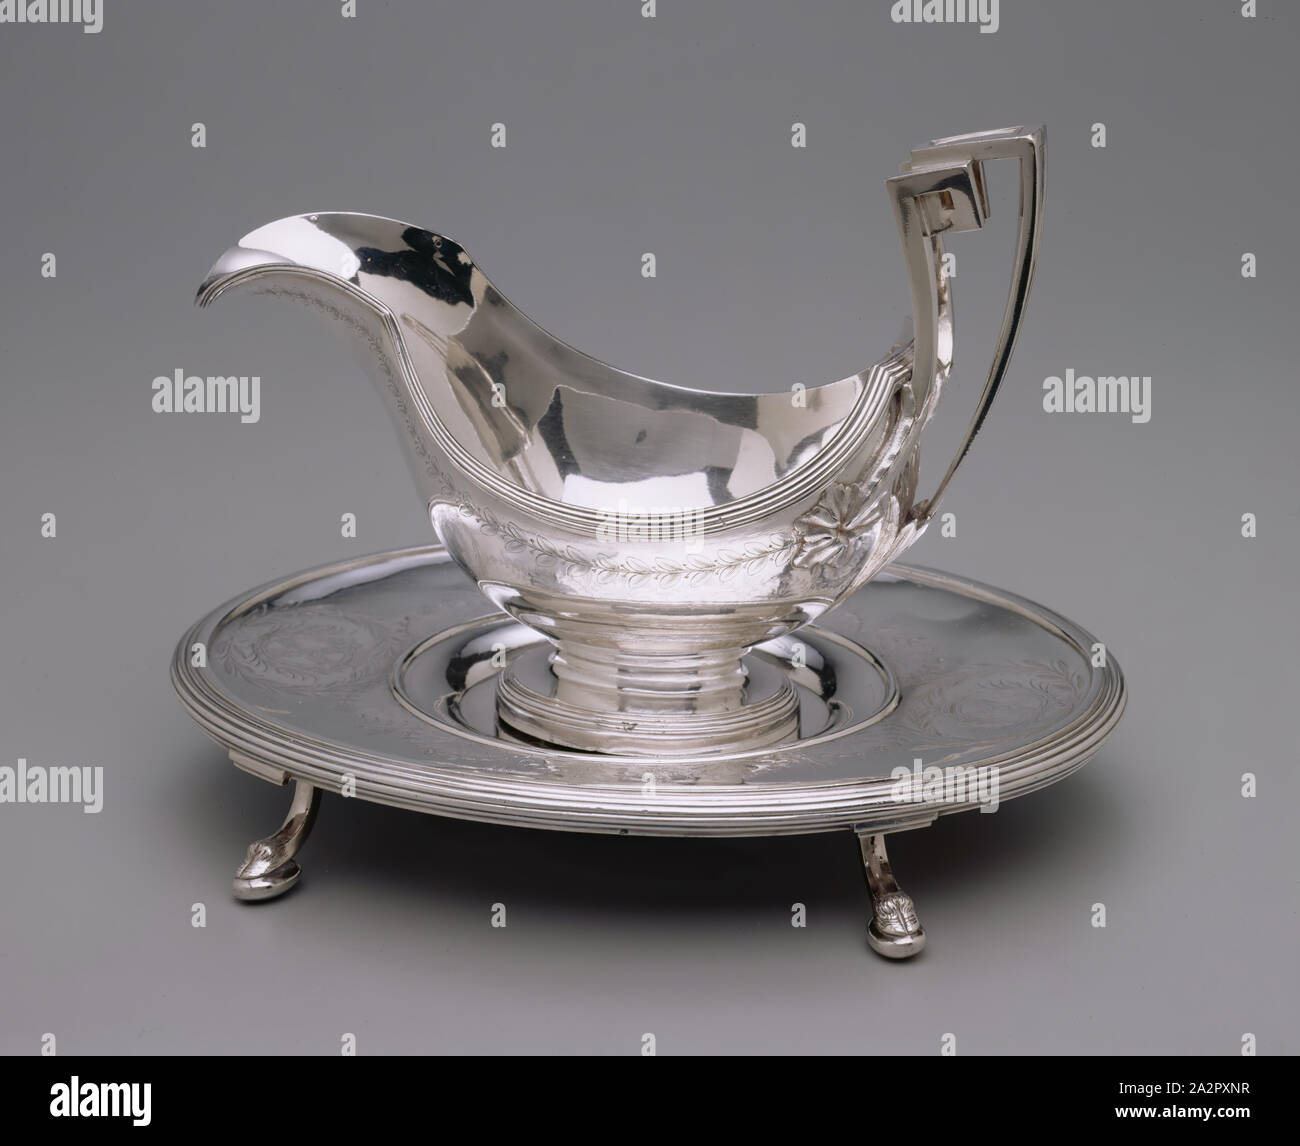 Henri Auguste, French, 1759-1816, Sauce Boat with Stand, between 1786 and 1787, silver, Overall: 8 × 10 7/8 × 8 7/8 inches (20.3 × 27.6 × 22.5 cm Stock Photo